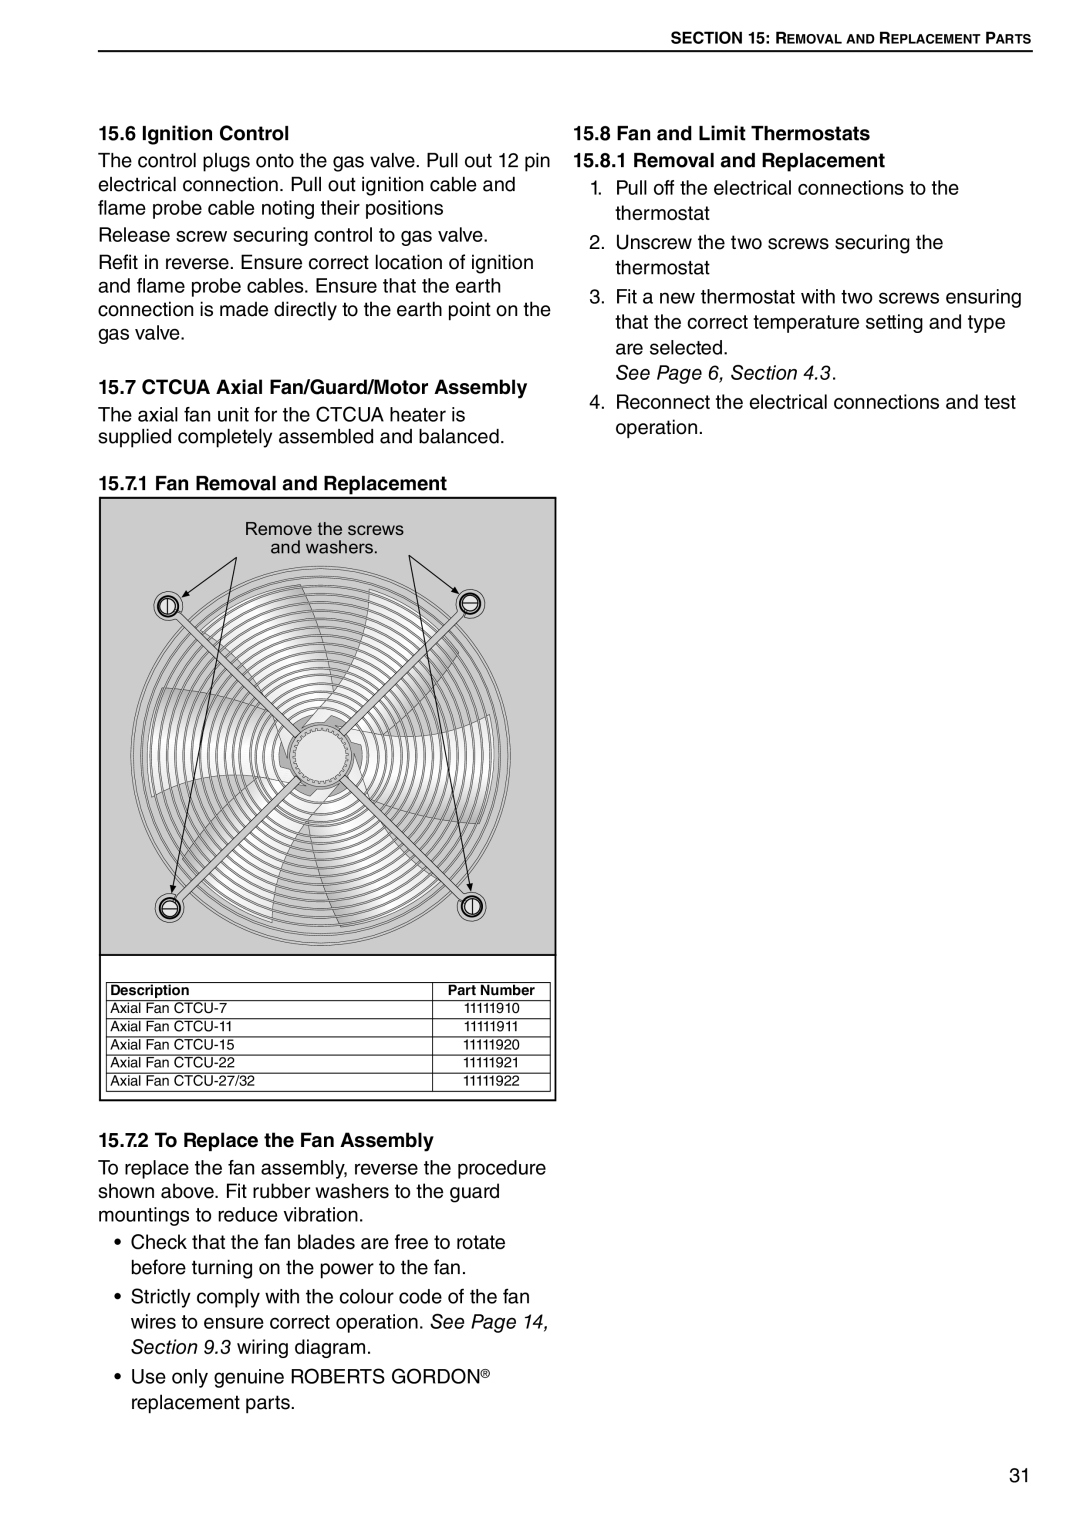 Roberts Gorden Ignition Control, CTCUA Axial Fan/Guard/Motor Assembly, Fan Removal and Replacement, See Page 6, Section 